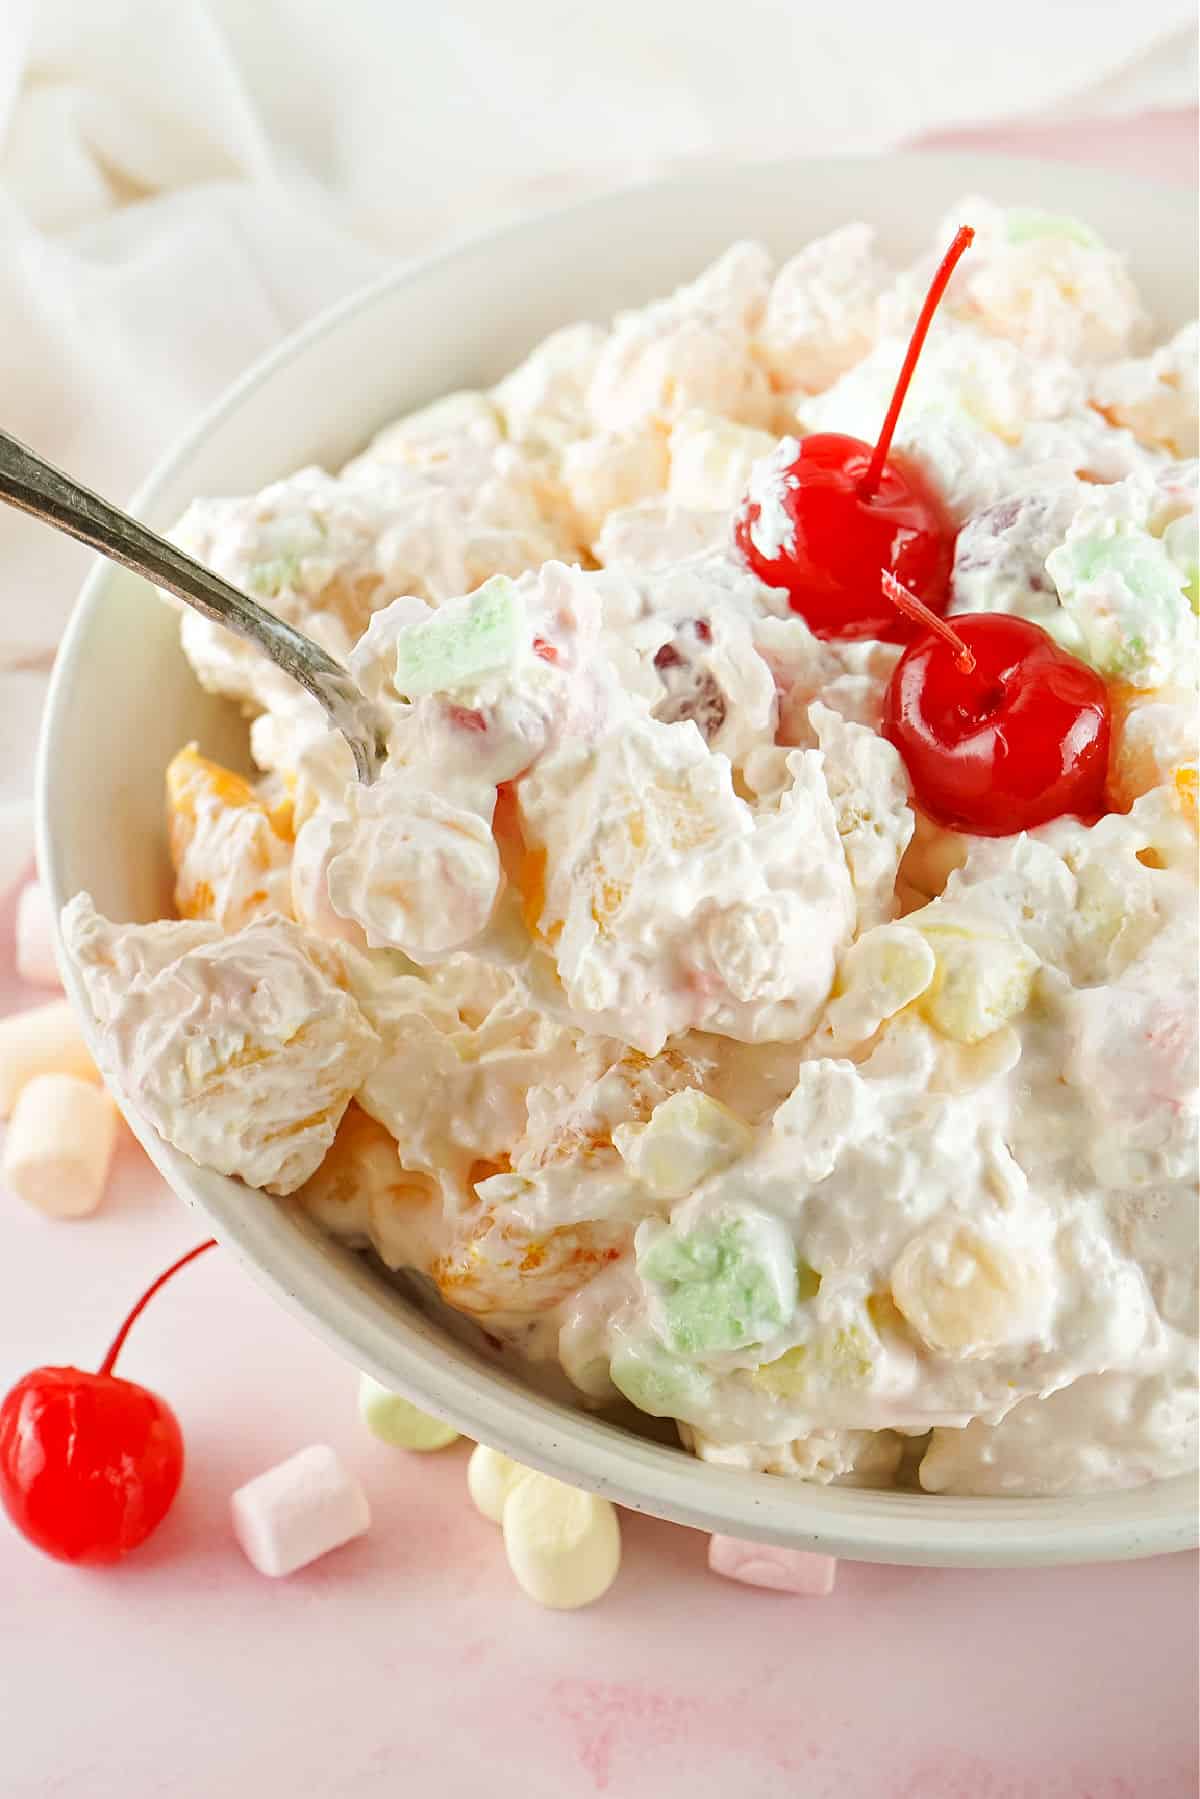 Ambrosia salad in a bowl with spoon for serving.